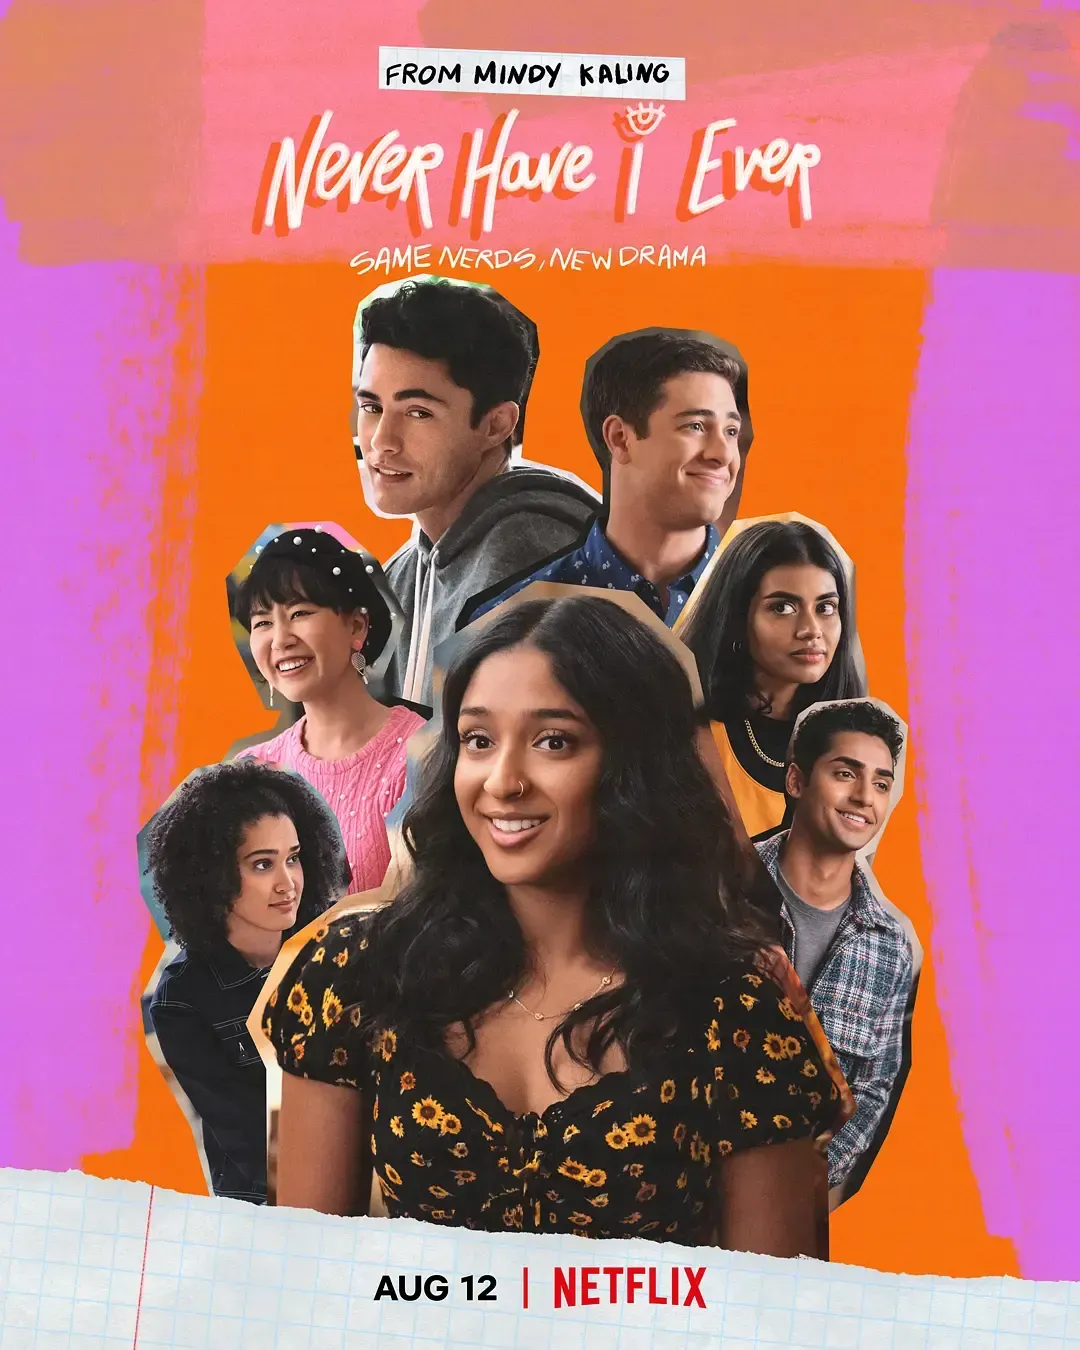 Netflix's 'Never Have I Ever Season 3' Releases Official Trailer, it's Coming August 12 | FMV6